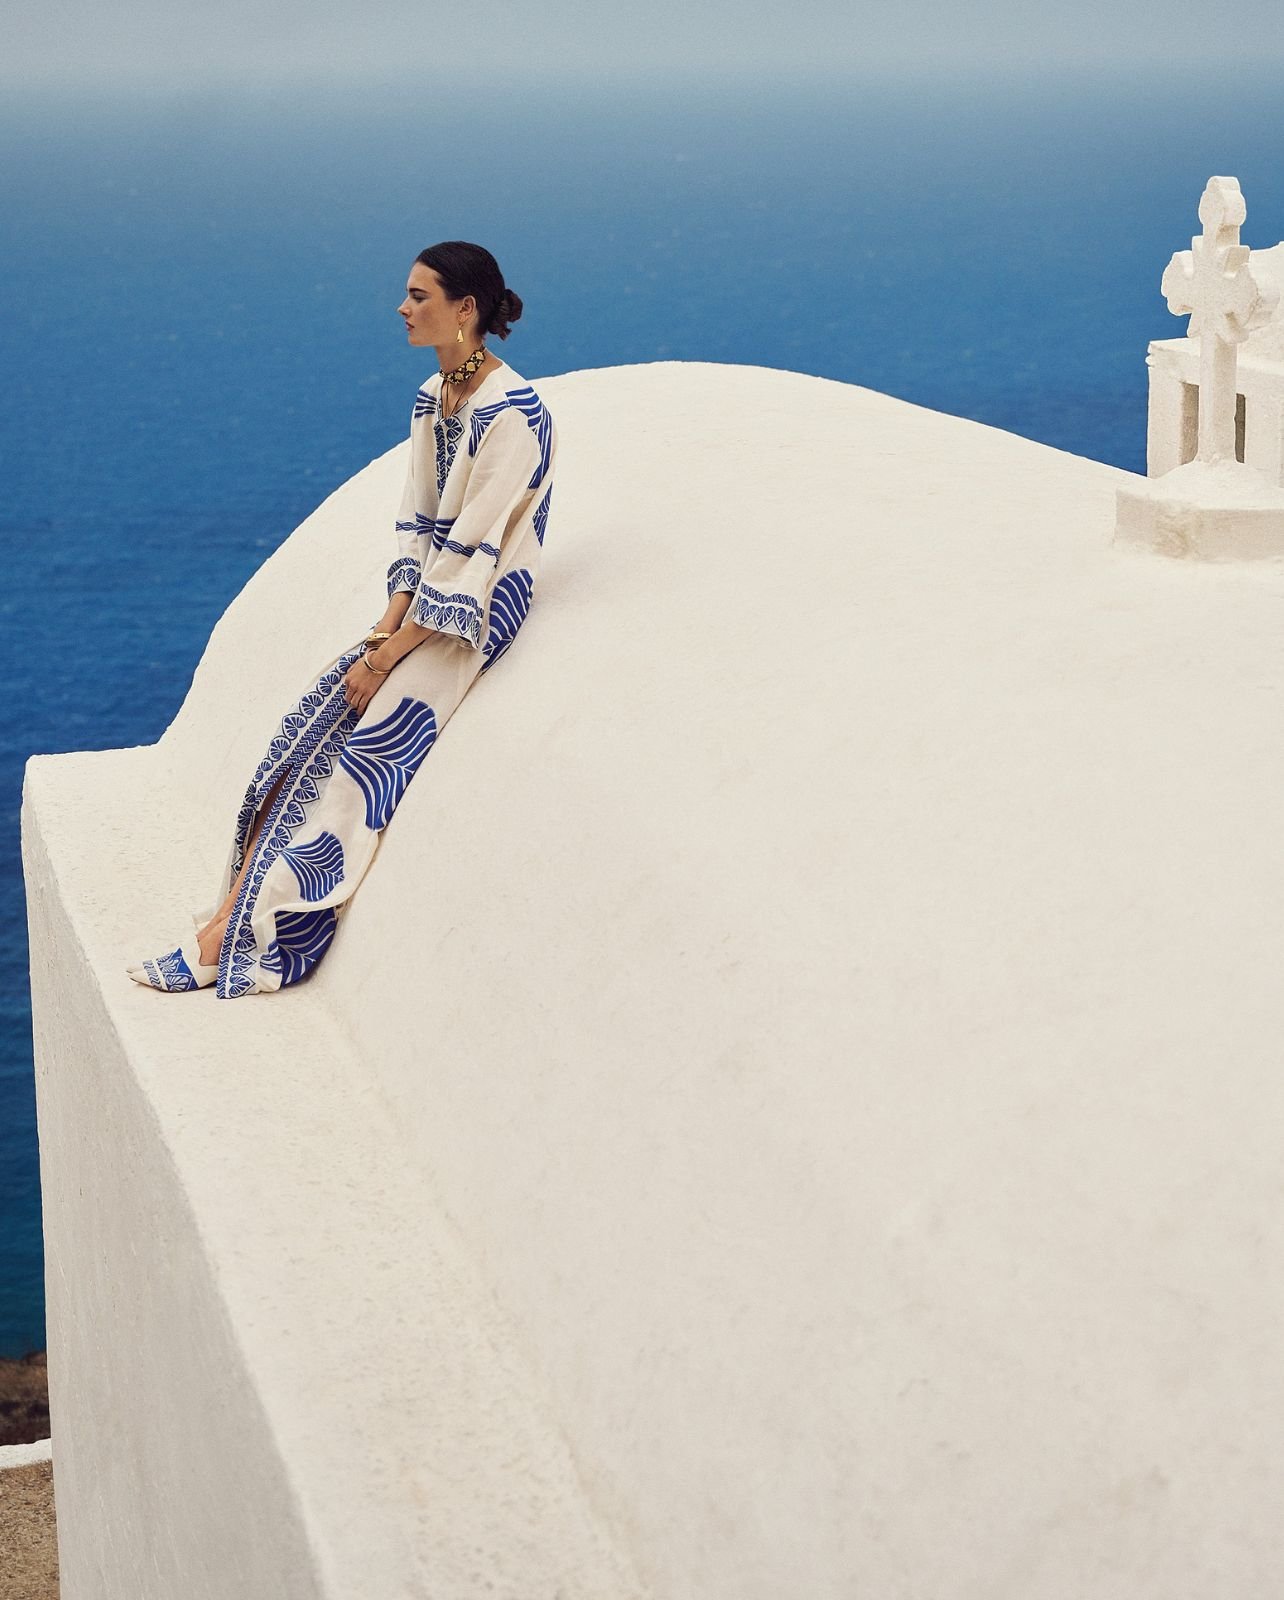 Model on white Roof in Greece with water view in background